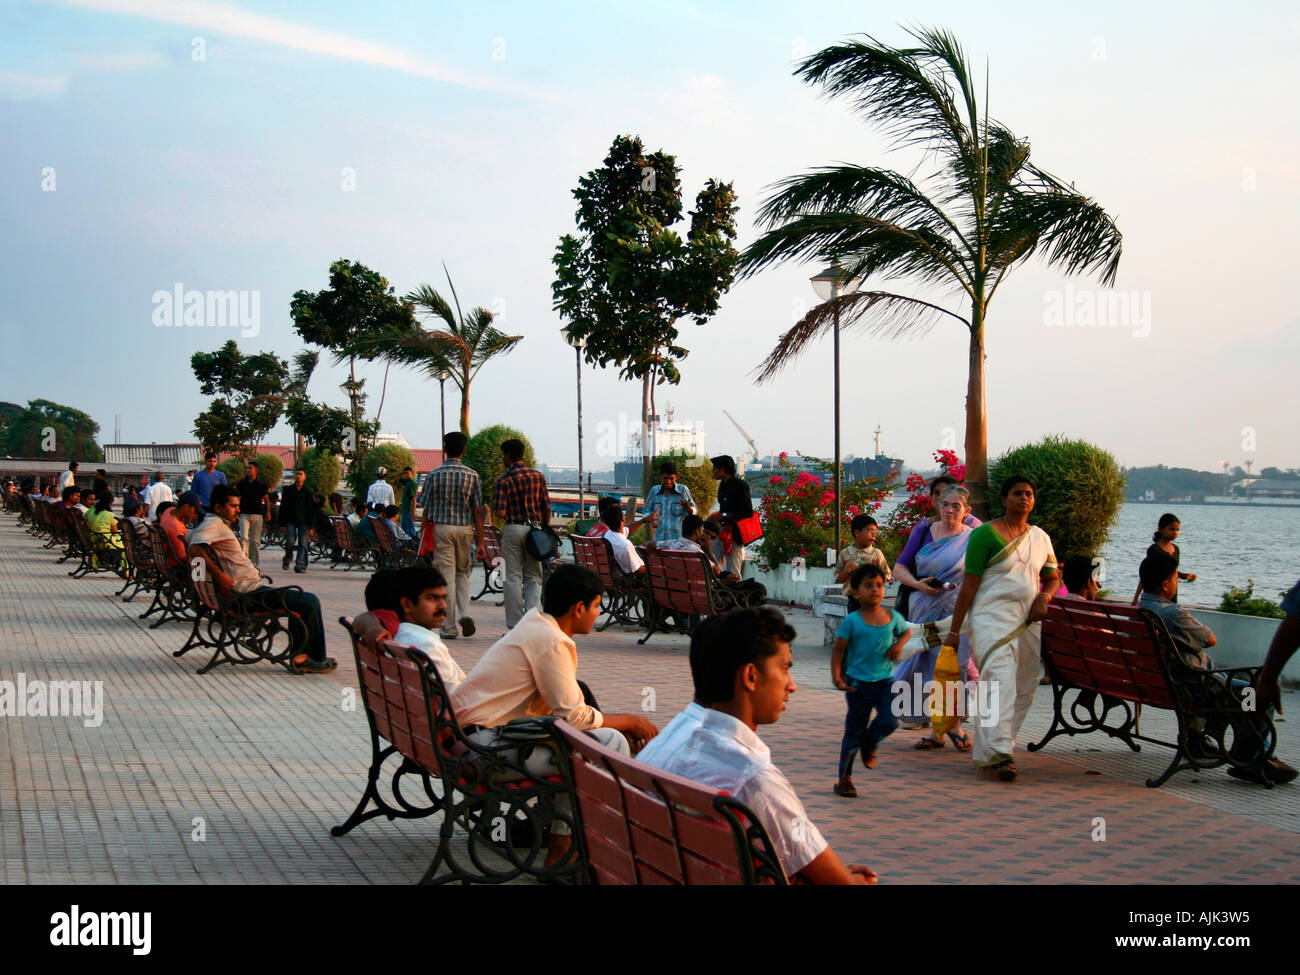 A perfect evening for the family by the lakeside at Kochi, Kerala, India Stock Photo